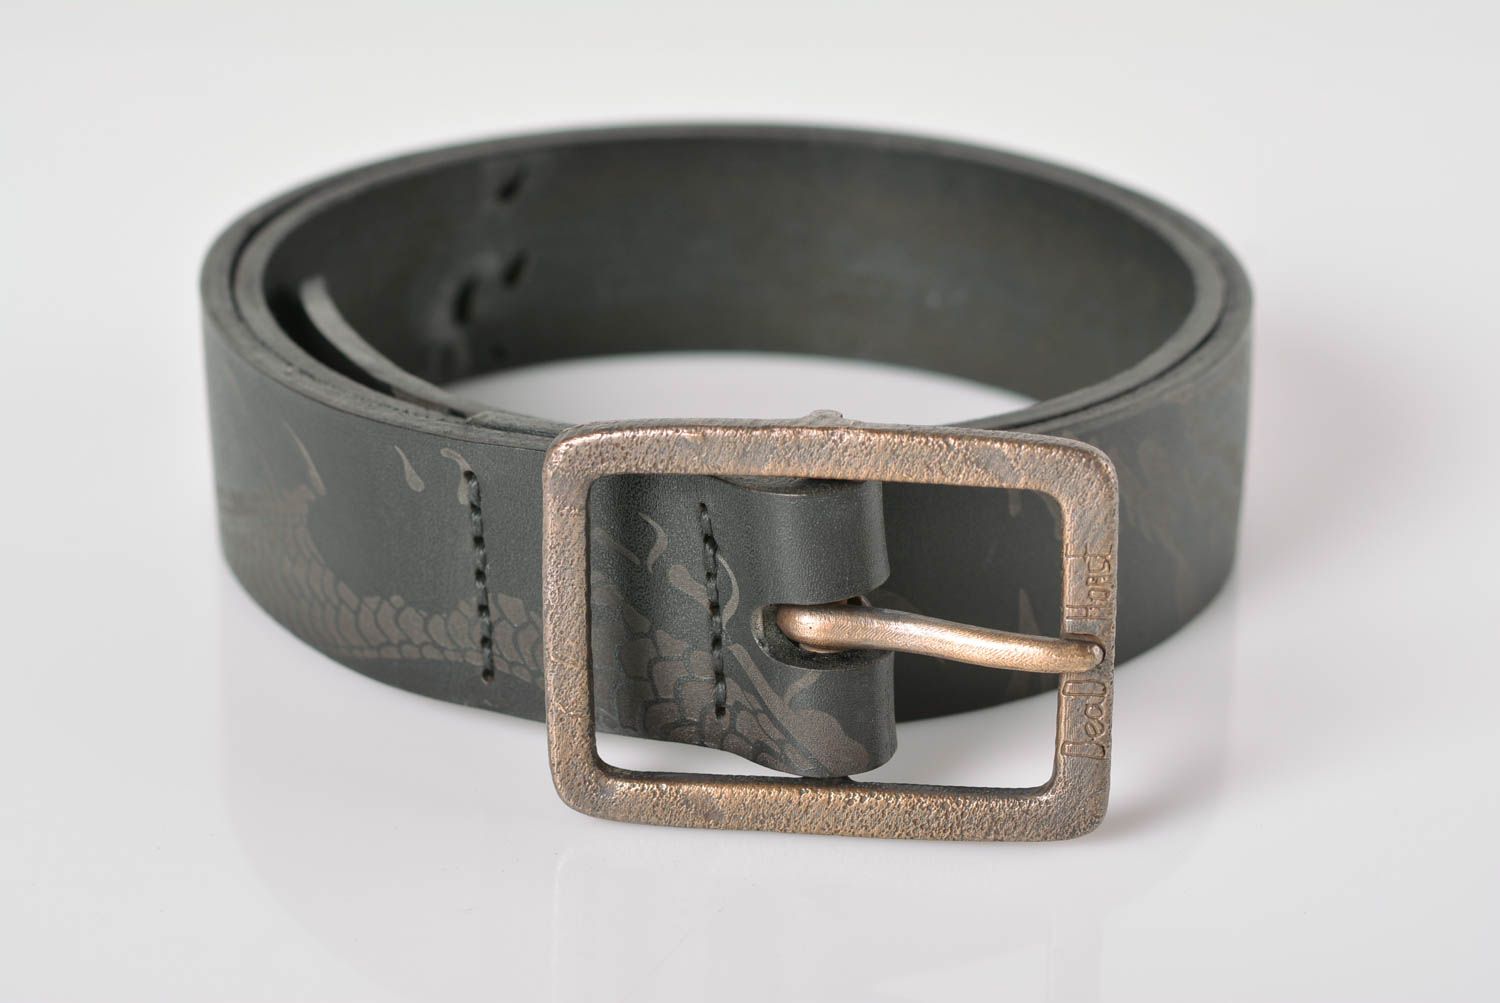 Handmade leather belt men accessories birthday gifts for him leather goods photo 1